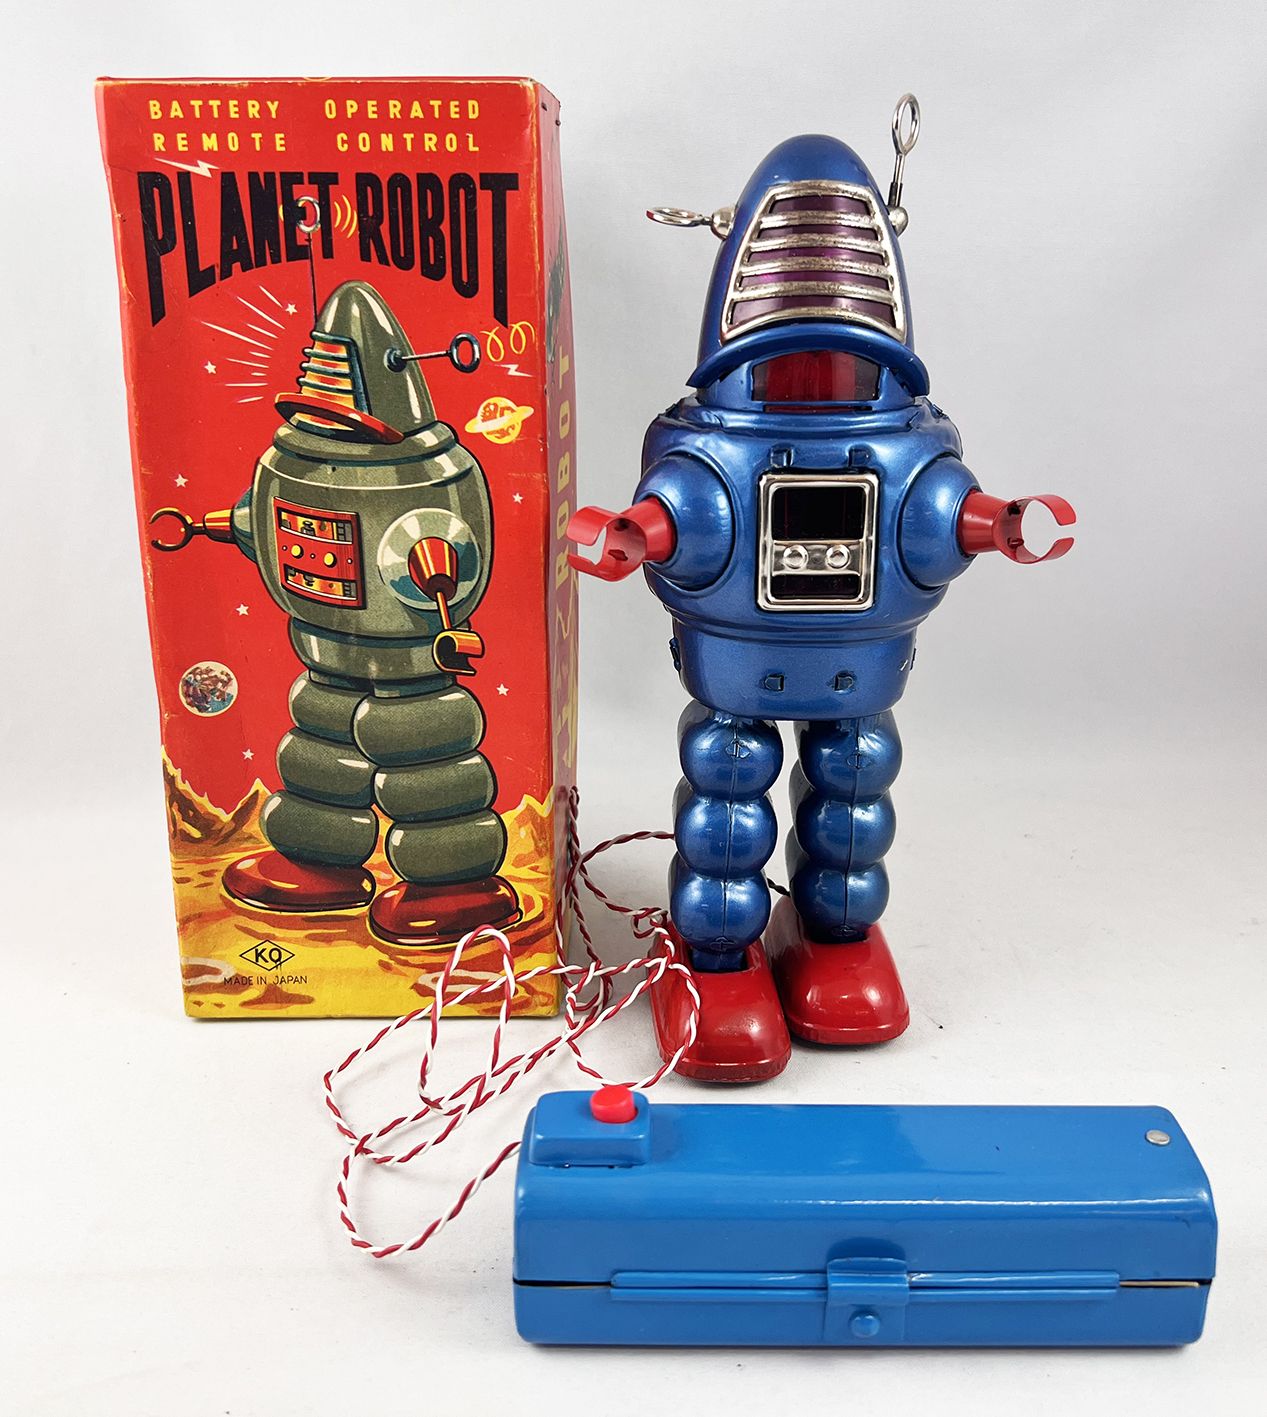 Remote Control Planet Robot (Battery Operated Tin Toy) - Yoshiya 